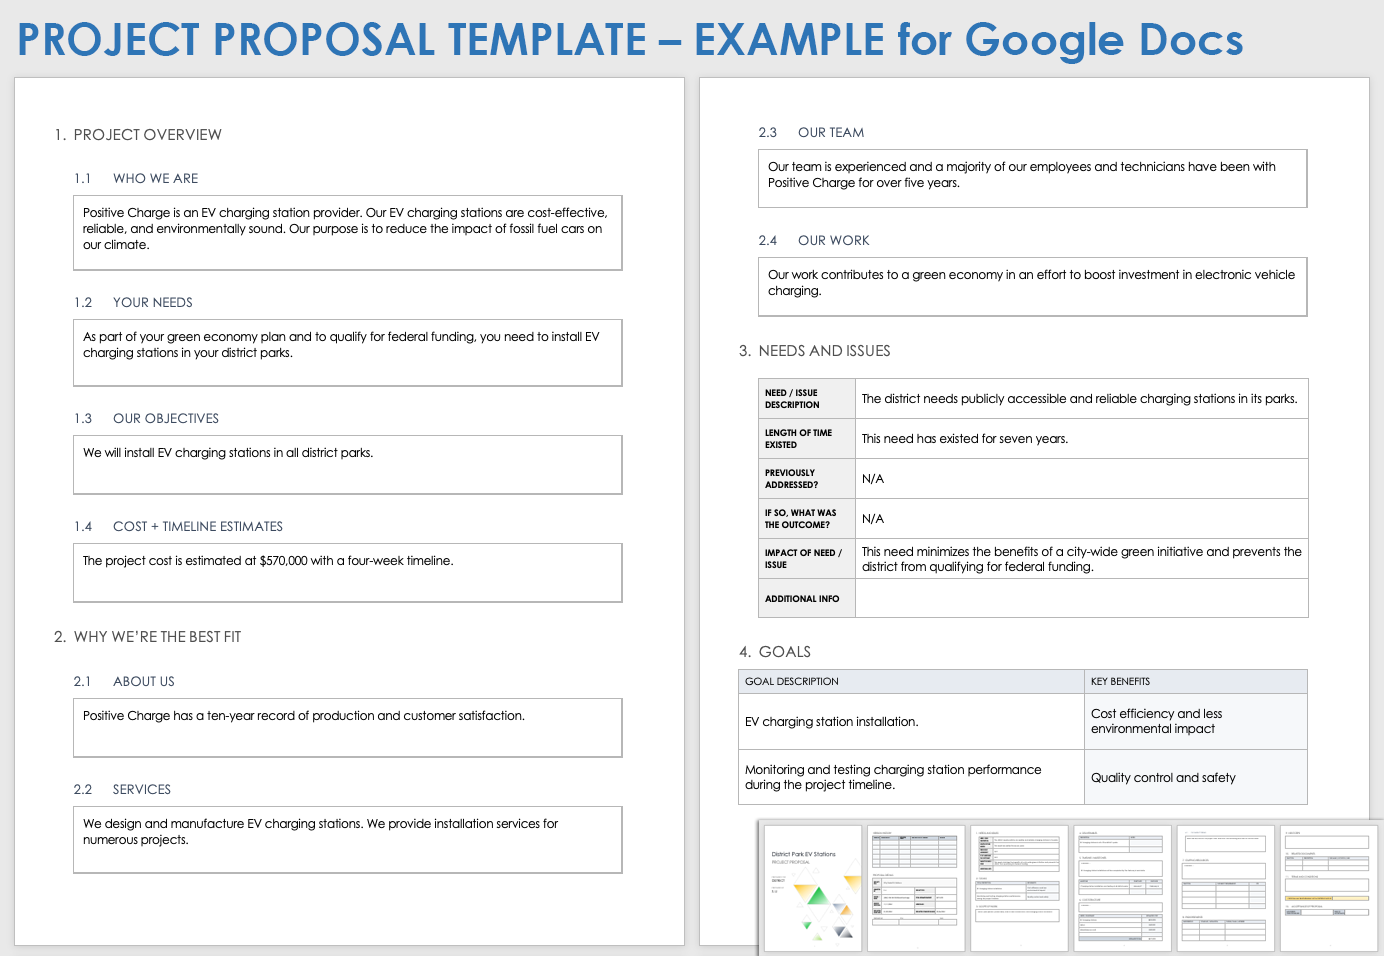 Project Proposal Example Template Google Docs